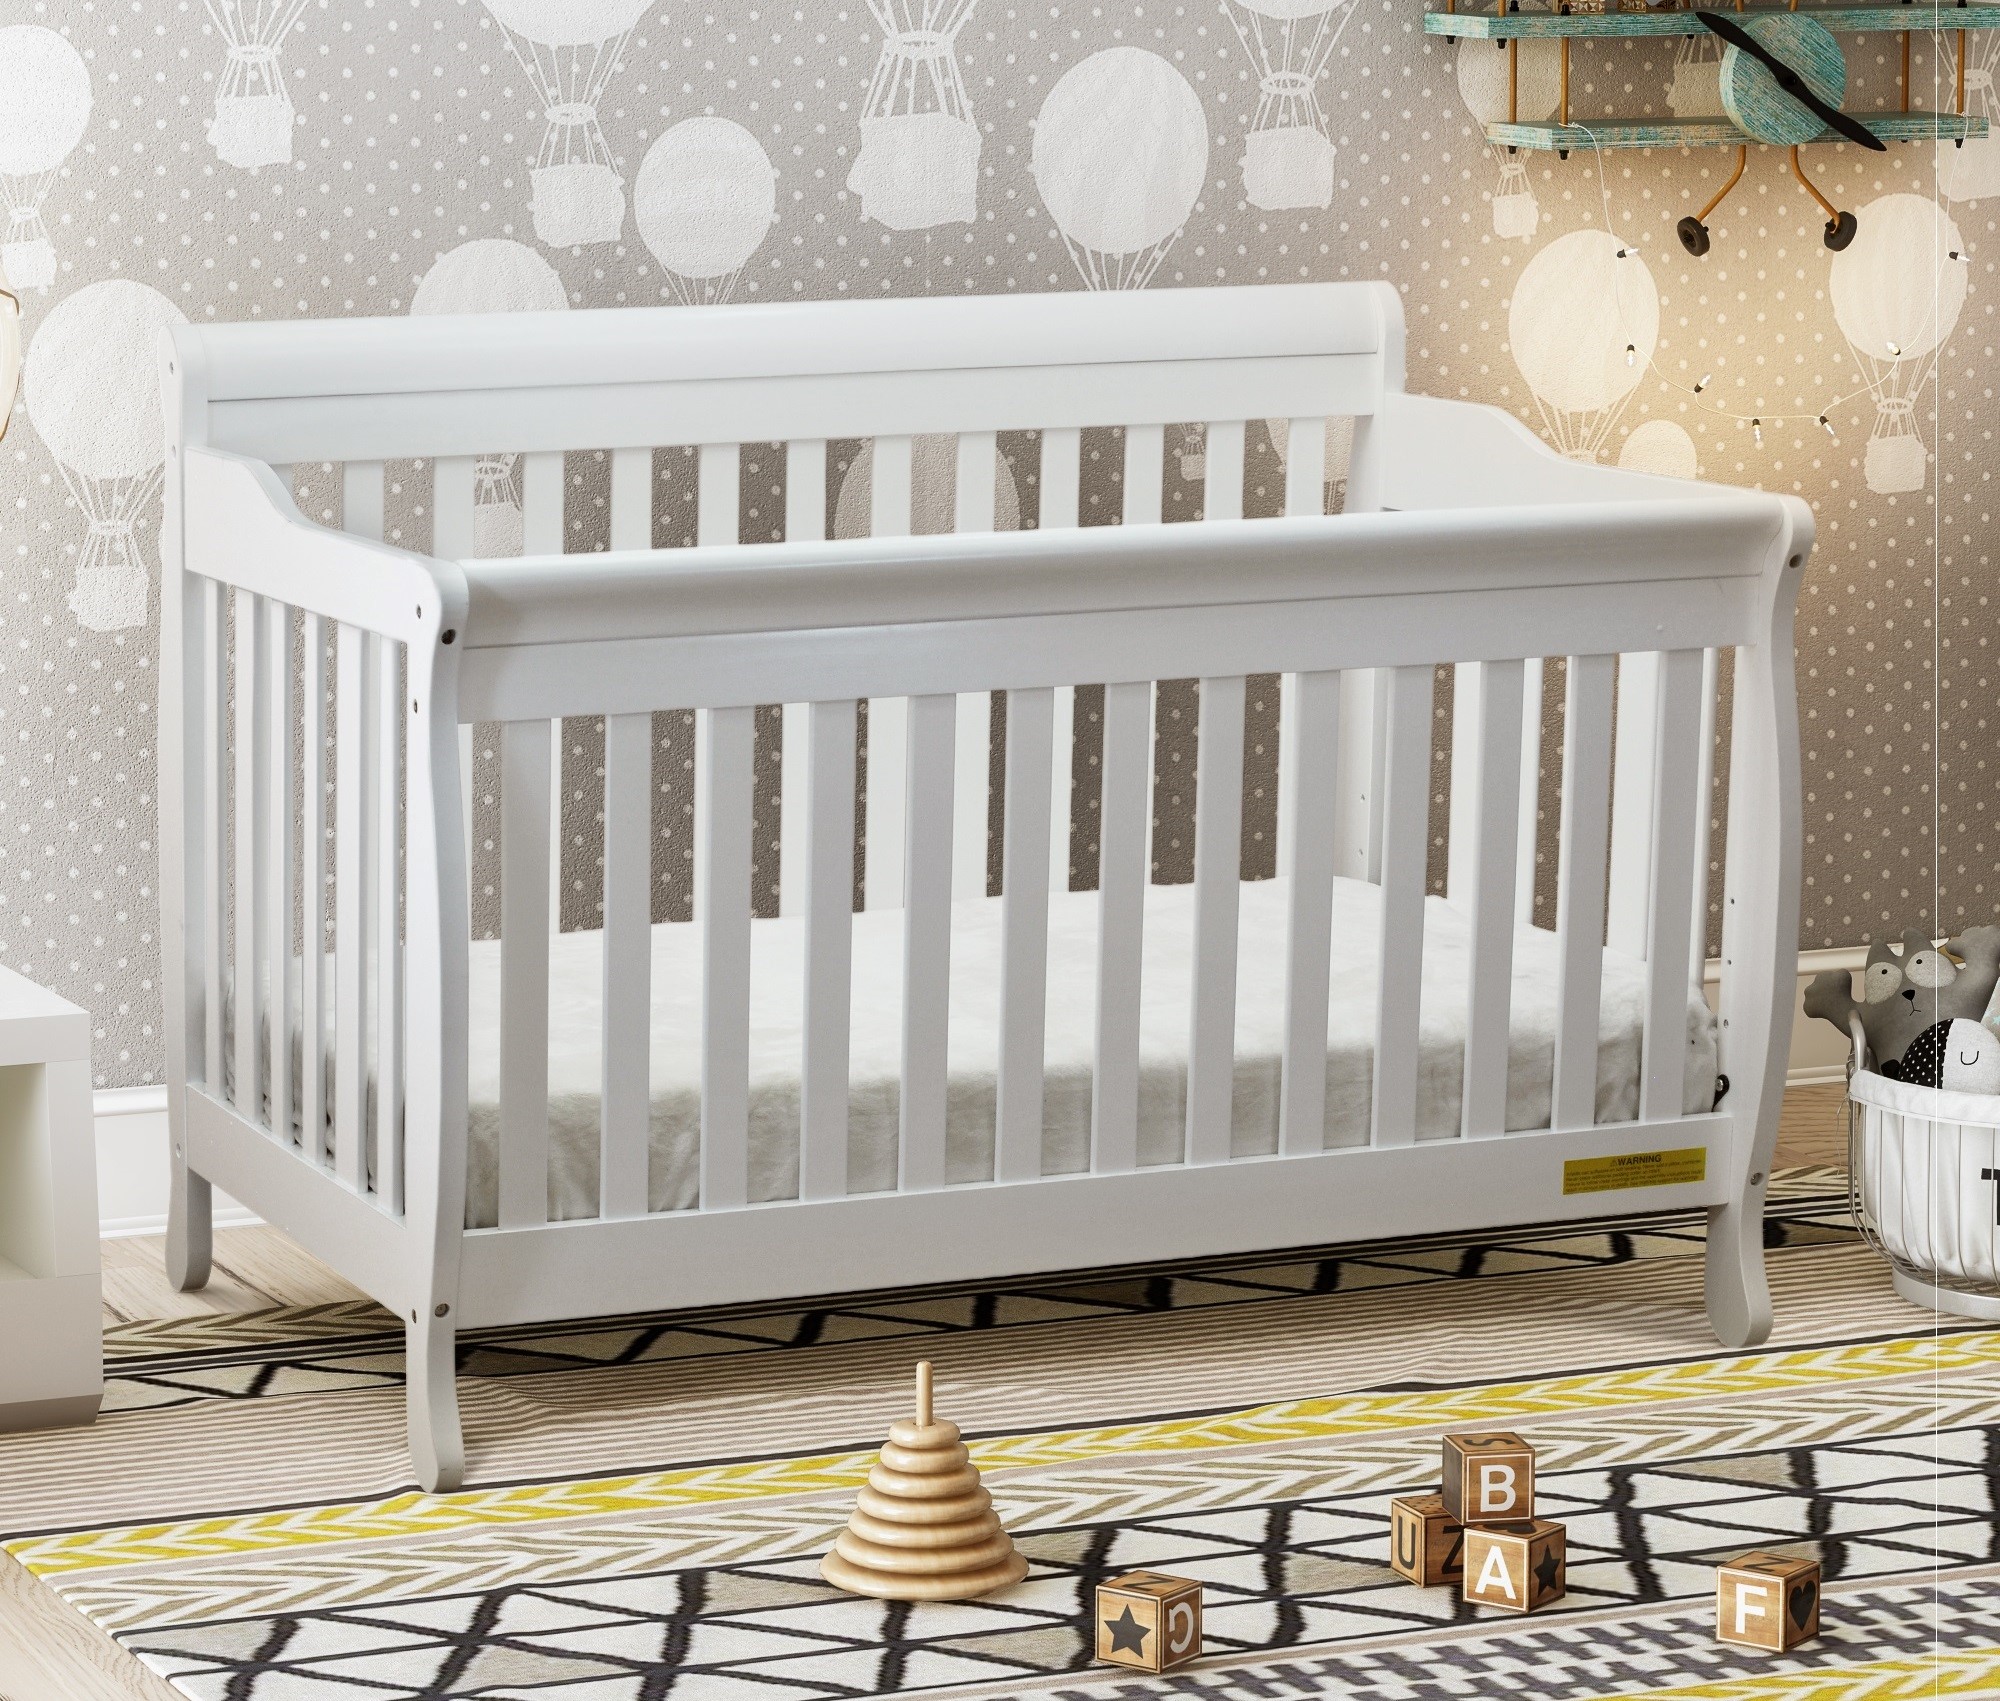 Afg Athena Alice 3 In 1 Convertible Crib With Toddler Rail - White - 4689w